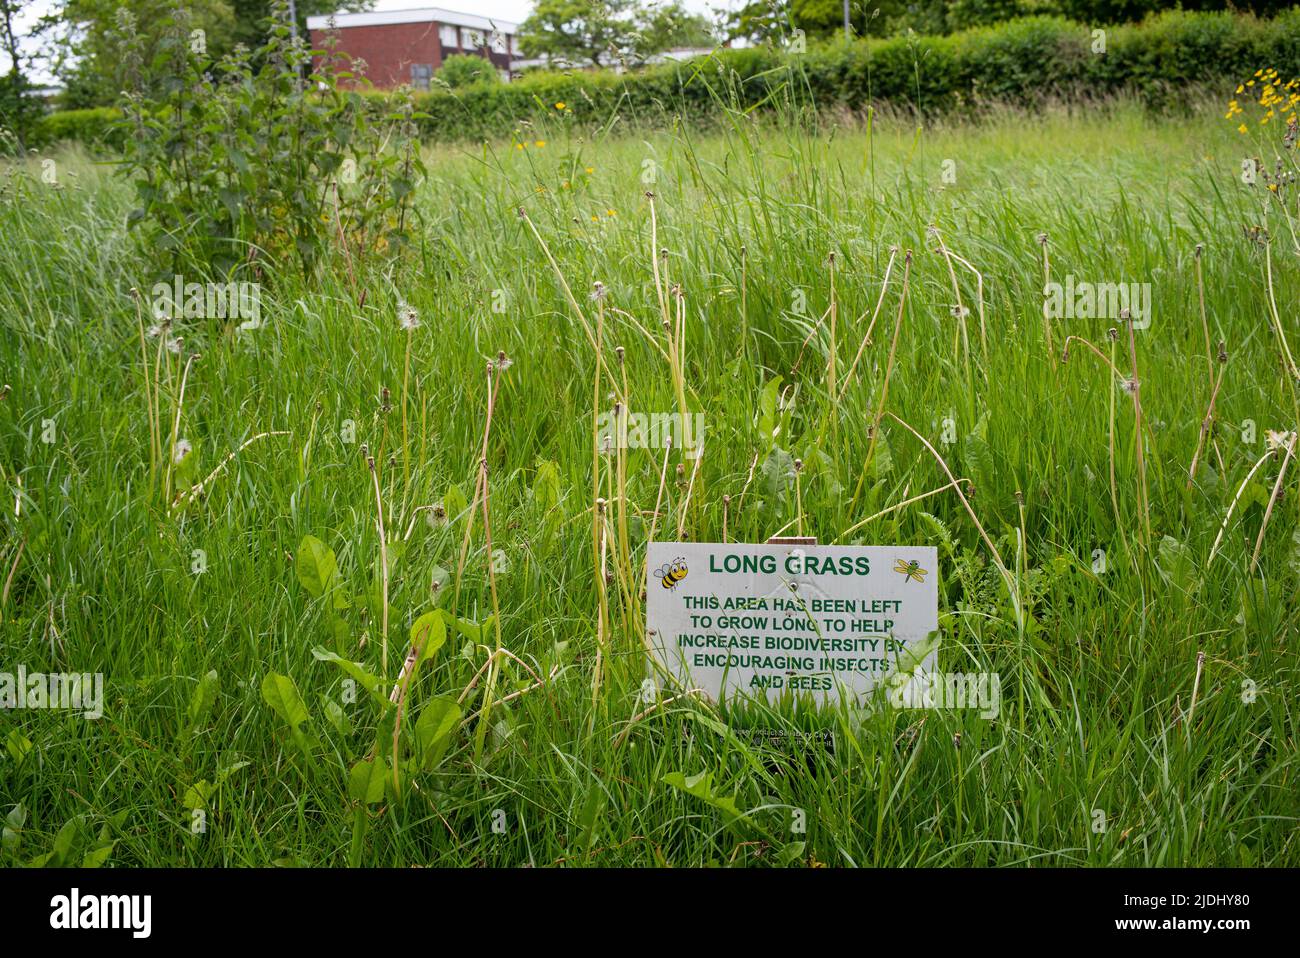 Area of Long overgrown grass in Salisbury city centre park left uncut to help increase biodiversity. With information sign to explain to public. Stock Photo